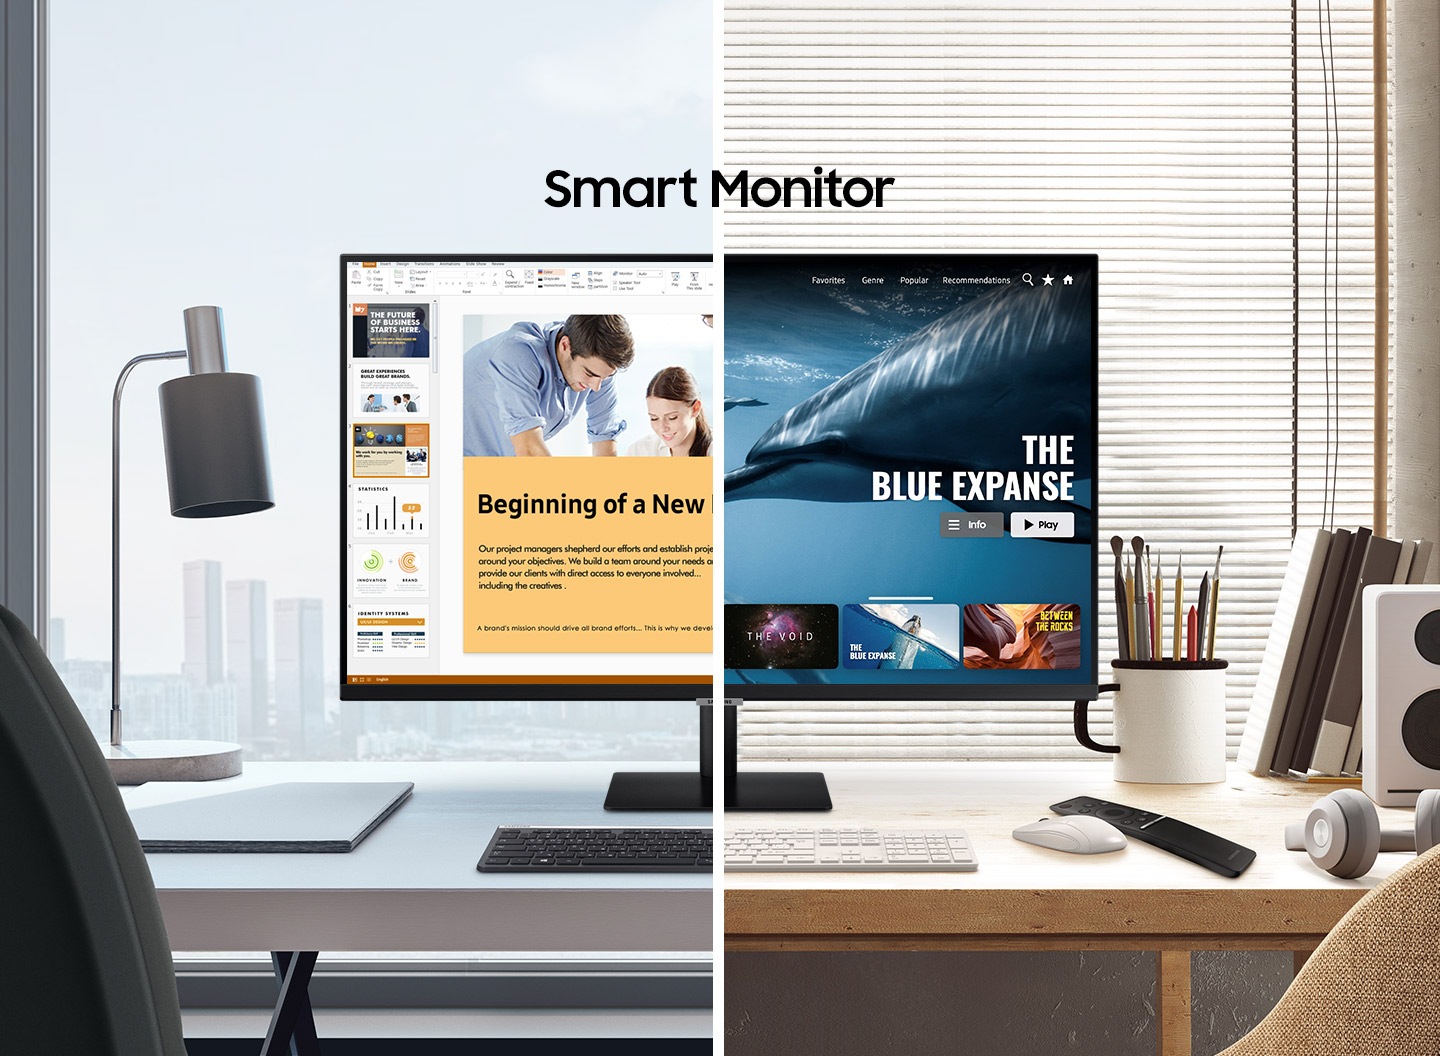 Below the title One for all, a vertical line divides two different images of a monitor. The line slides right to reveal an office desk with powerpoint on the monitor and the words Work Smart, and slides left to reveal a home desk with a movie playing on the monitor and the words Play Smart.